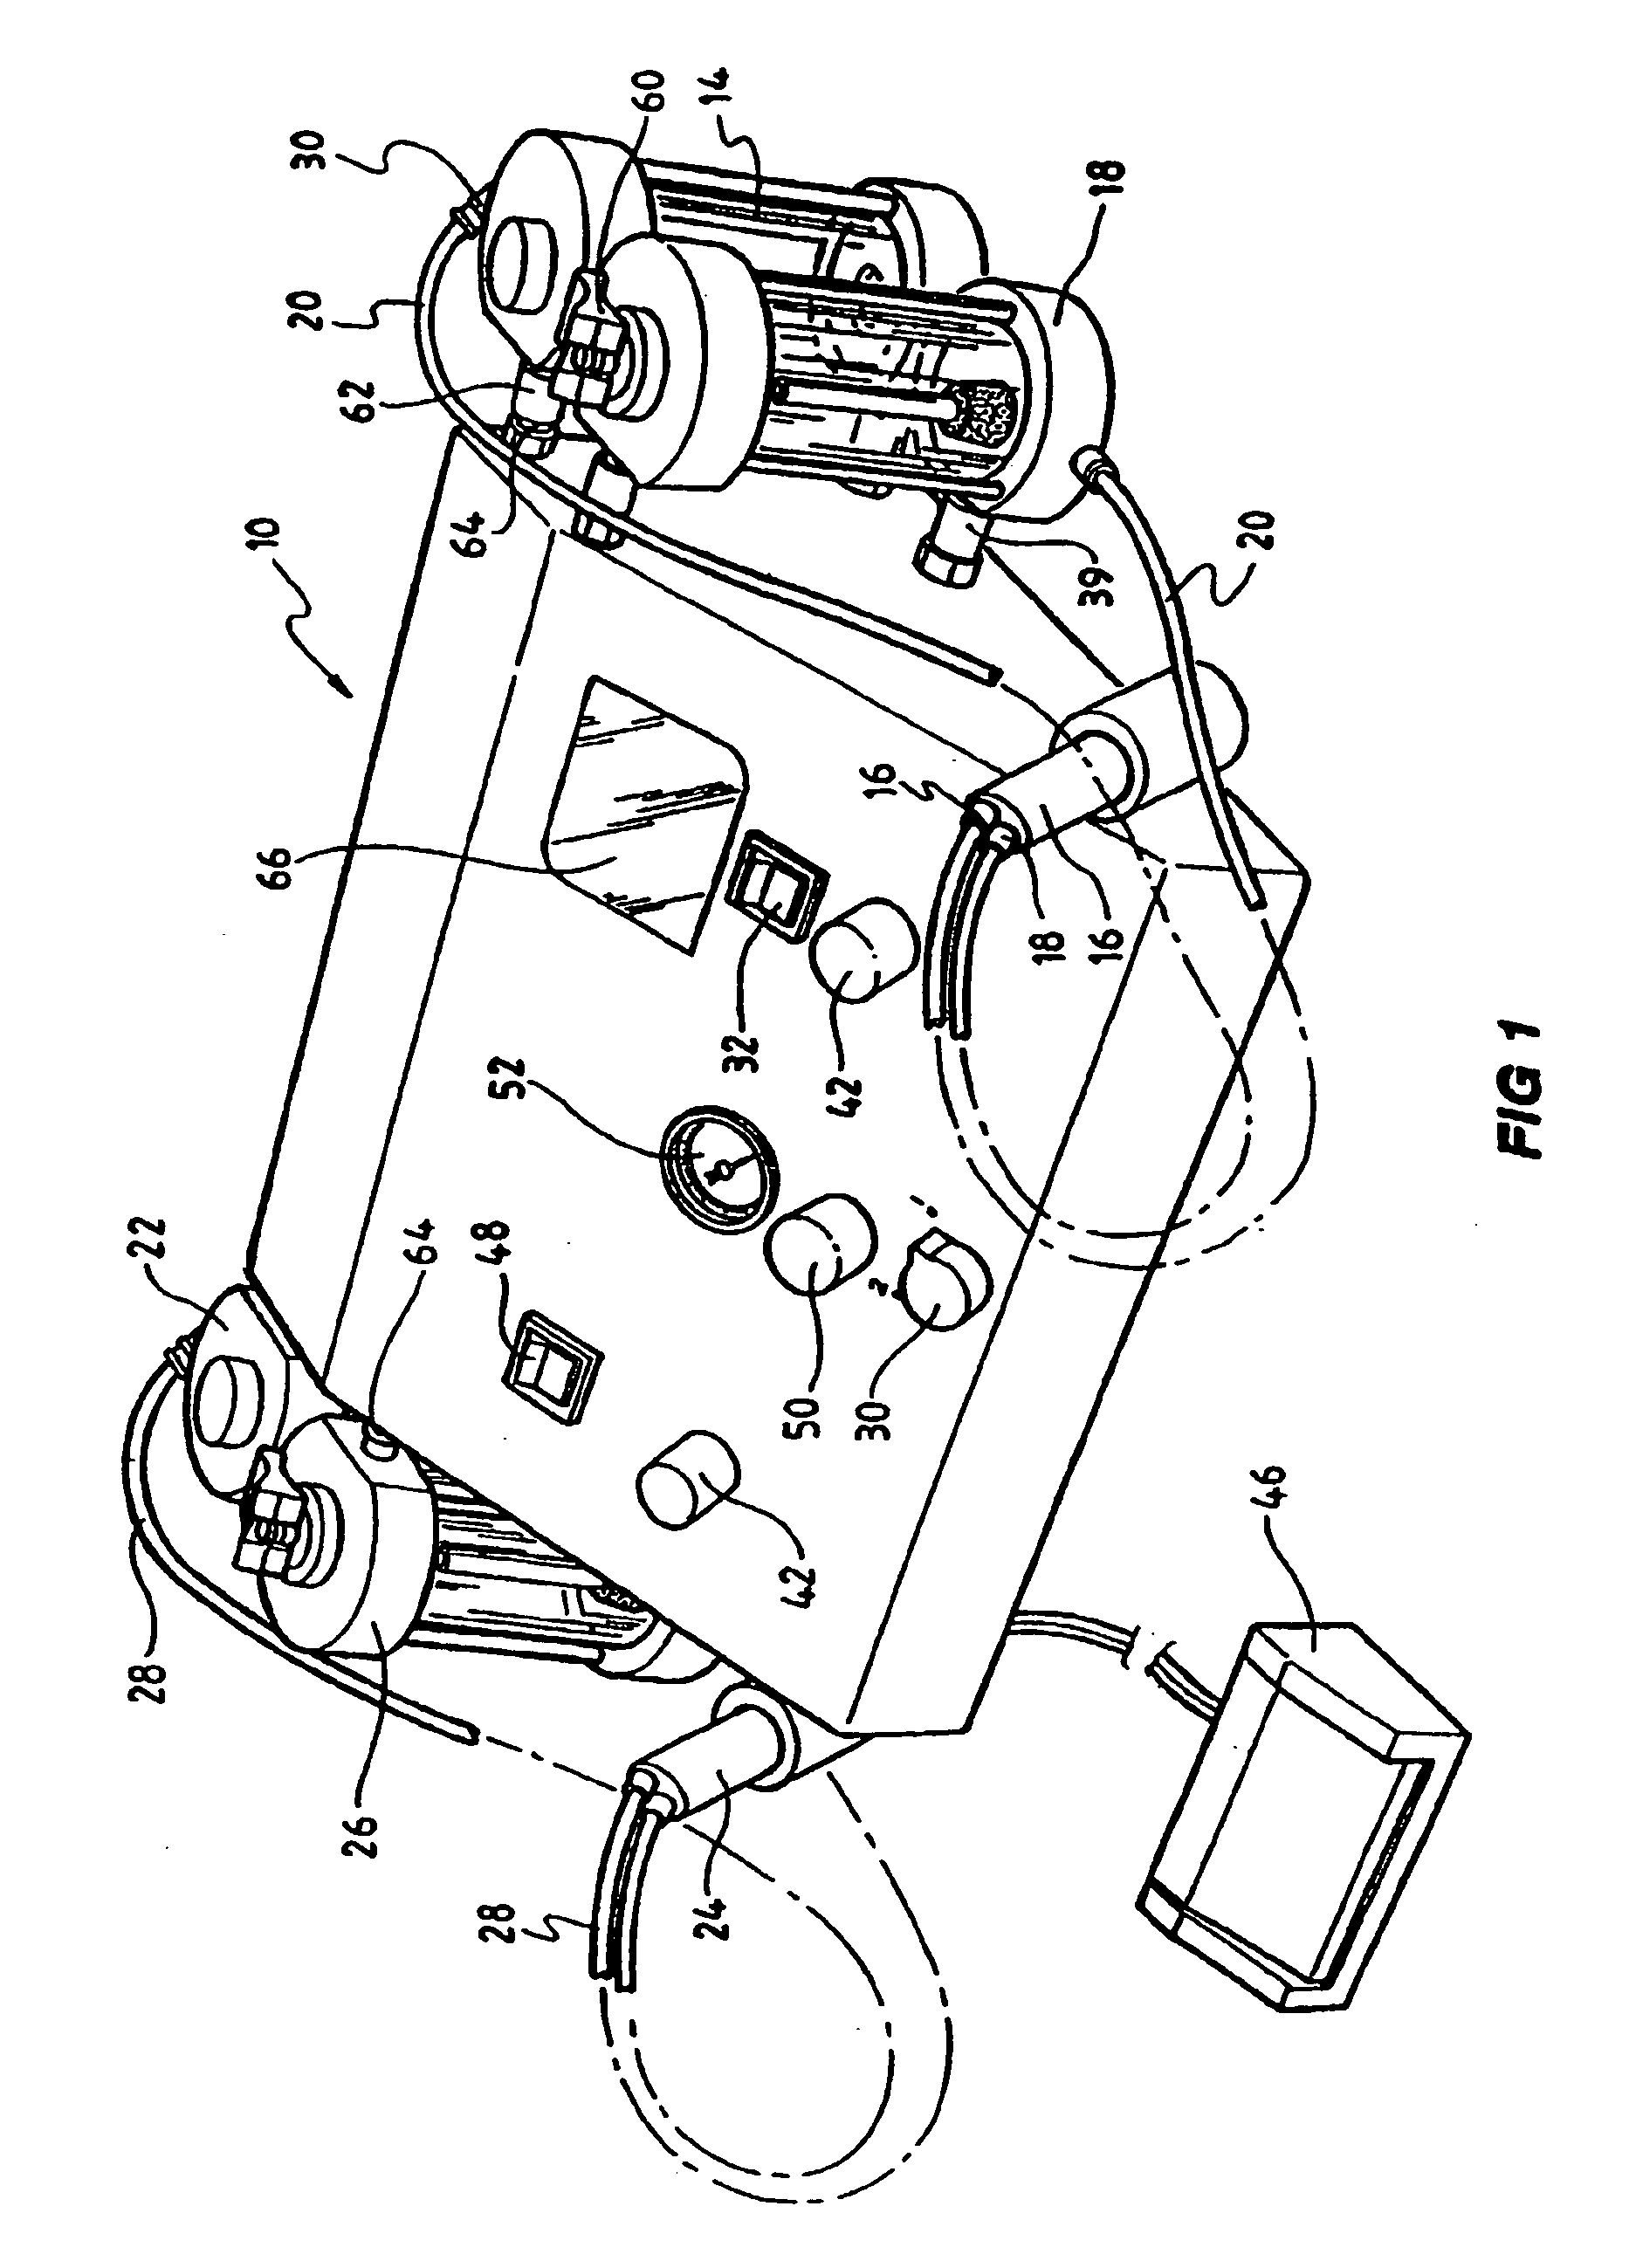 Apparatus for variable micro abrasion of human tissue and/or hides using different size and types of abrasive particles